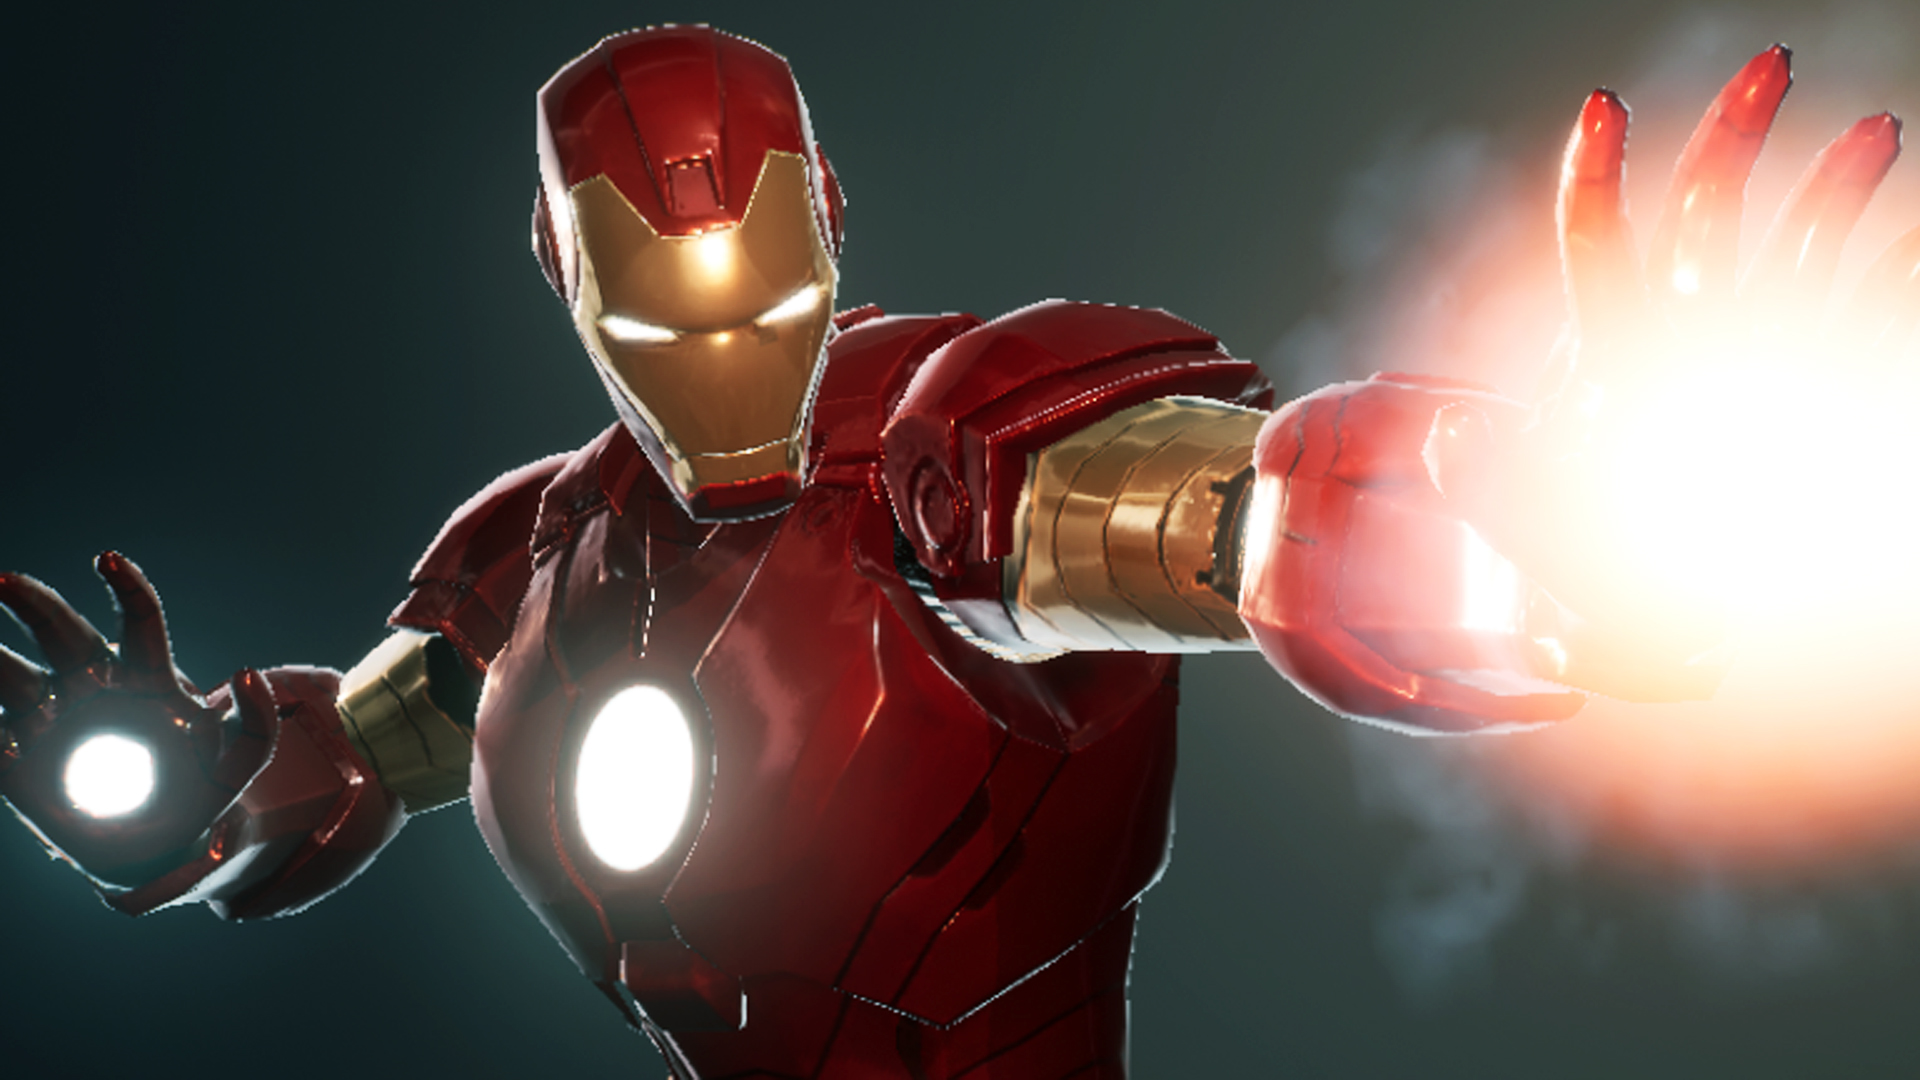 Rumour: an unannounced EA Marvel superhero game is coming